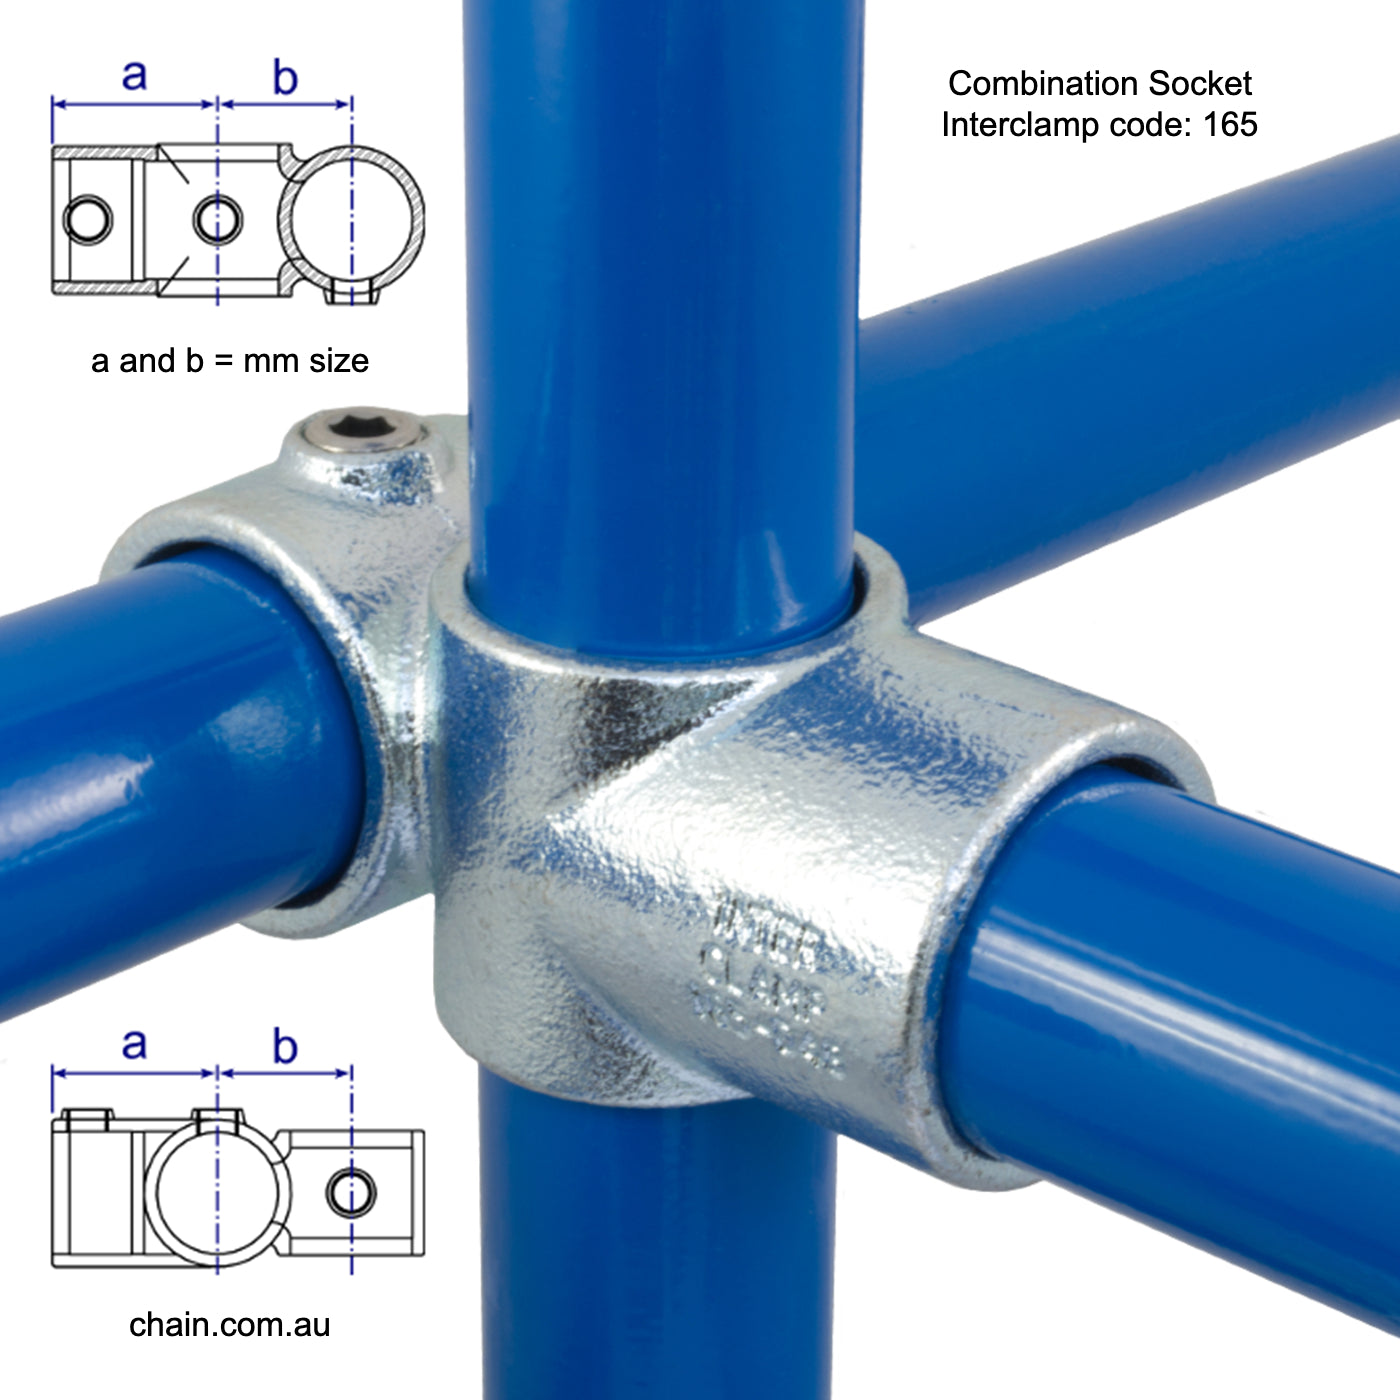 Combination Socket by Interclamp, Code 165. Shop rail, pipe and fence fittings online chain.com.au. Australia wide shipping.